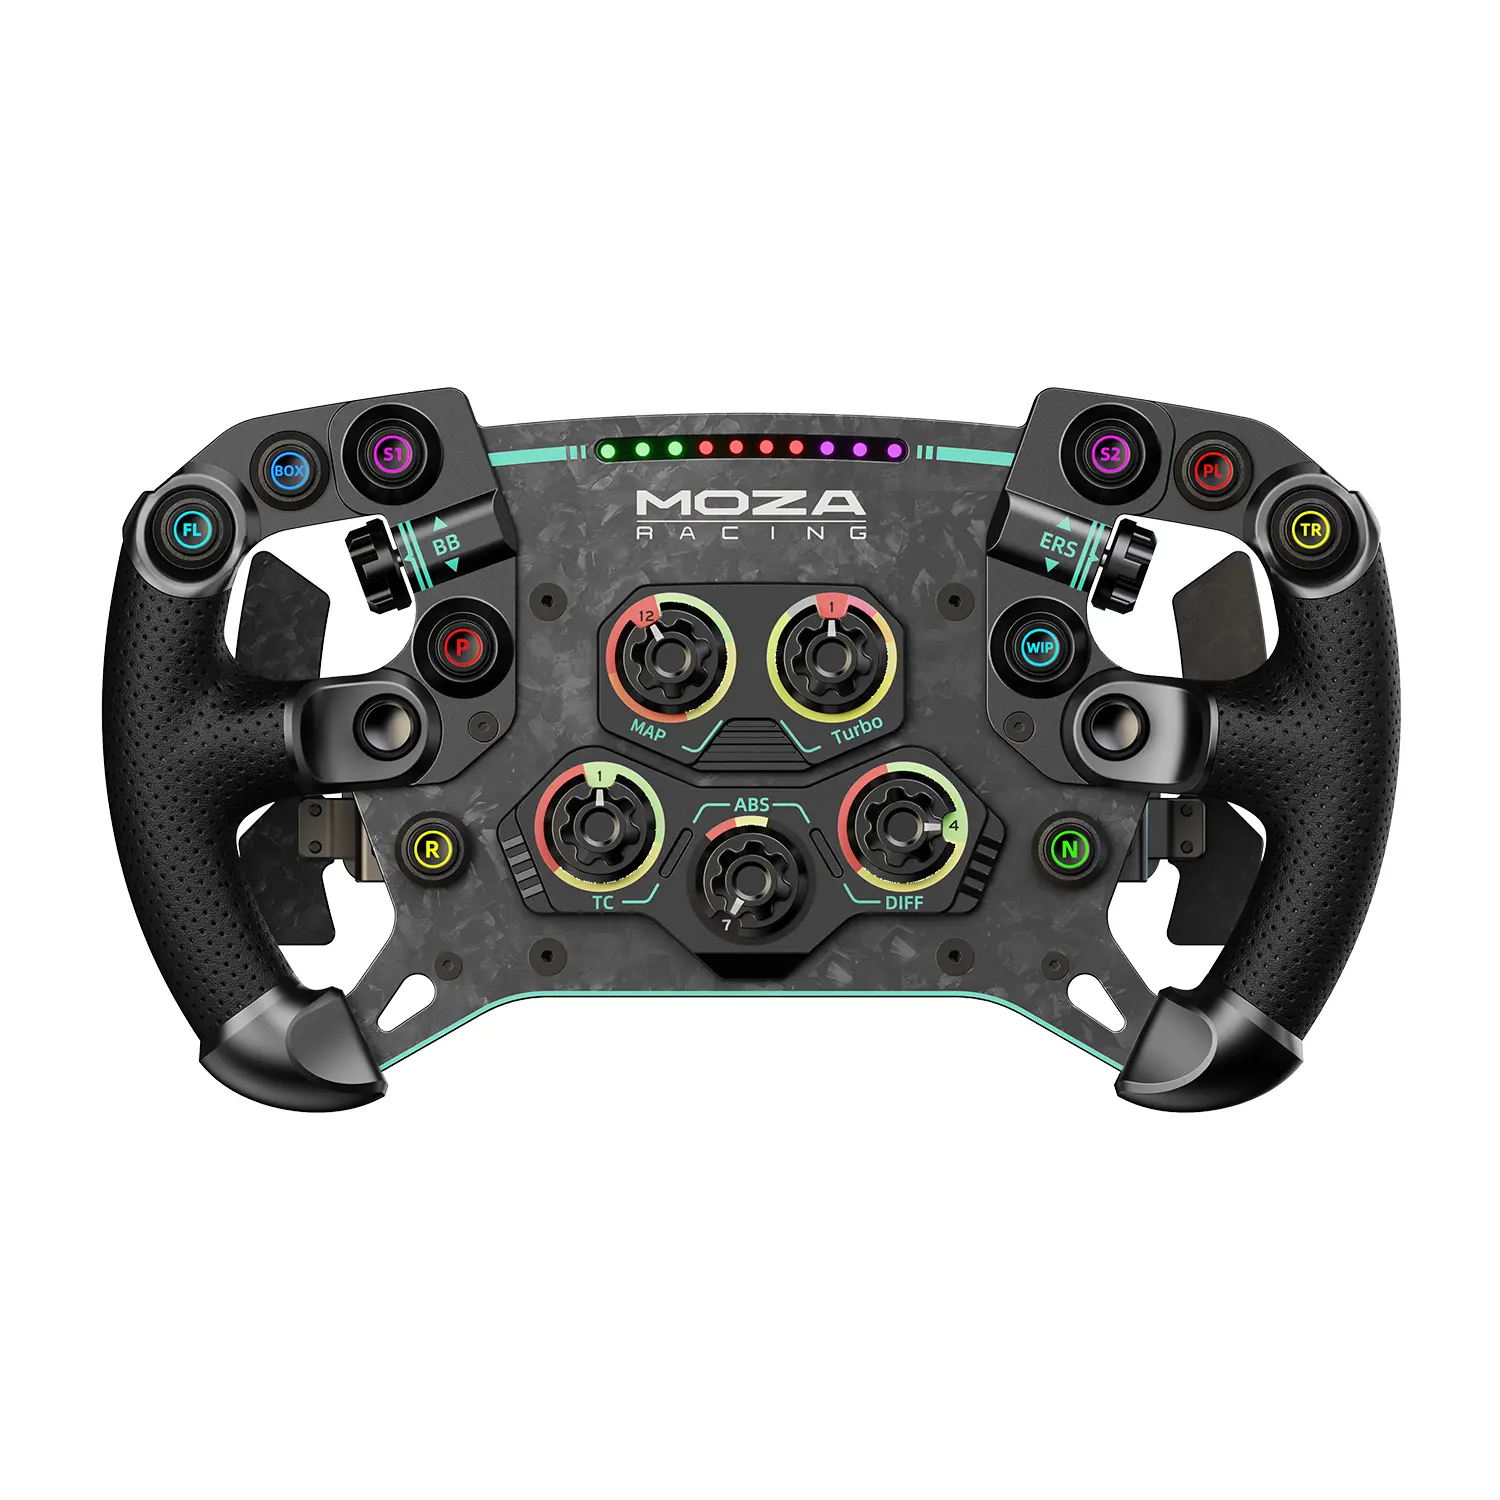 Looking for a racing setup that combines style and performance